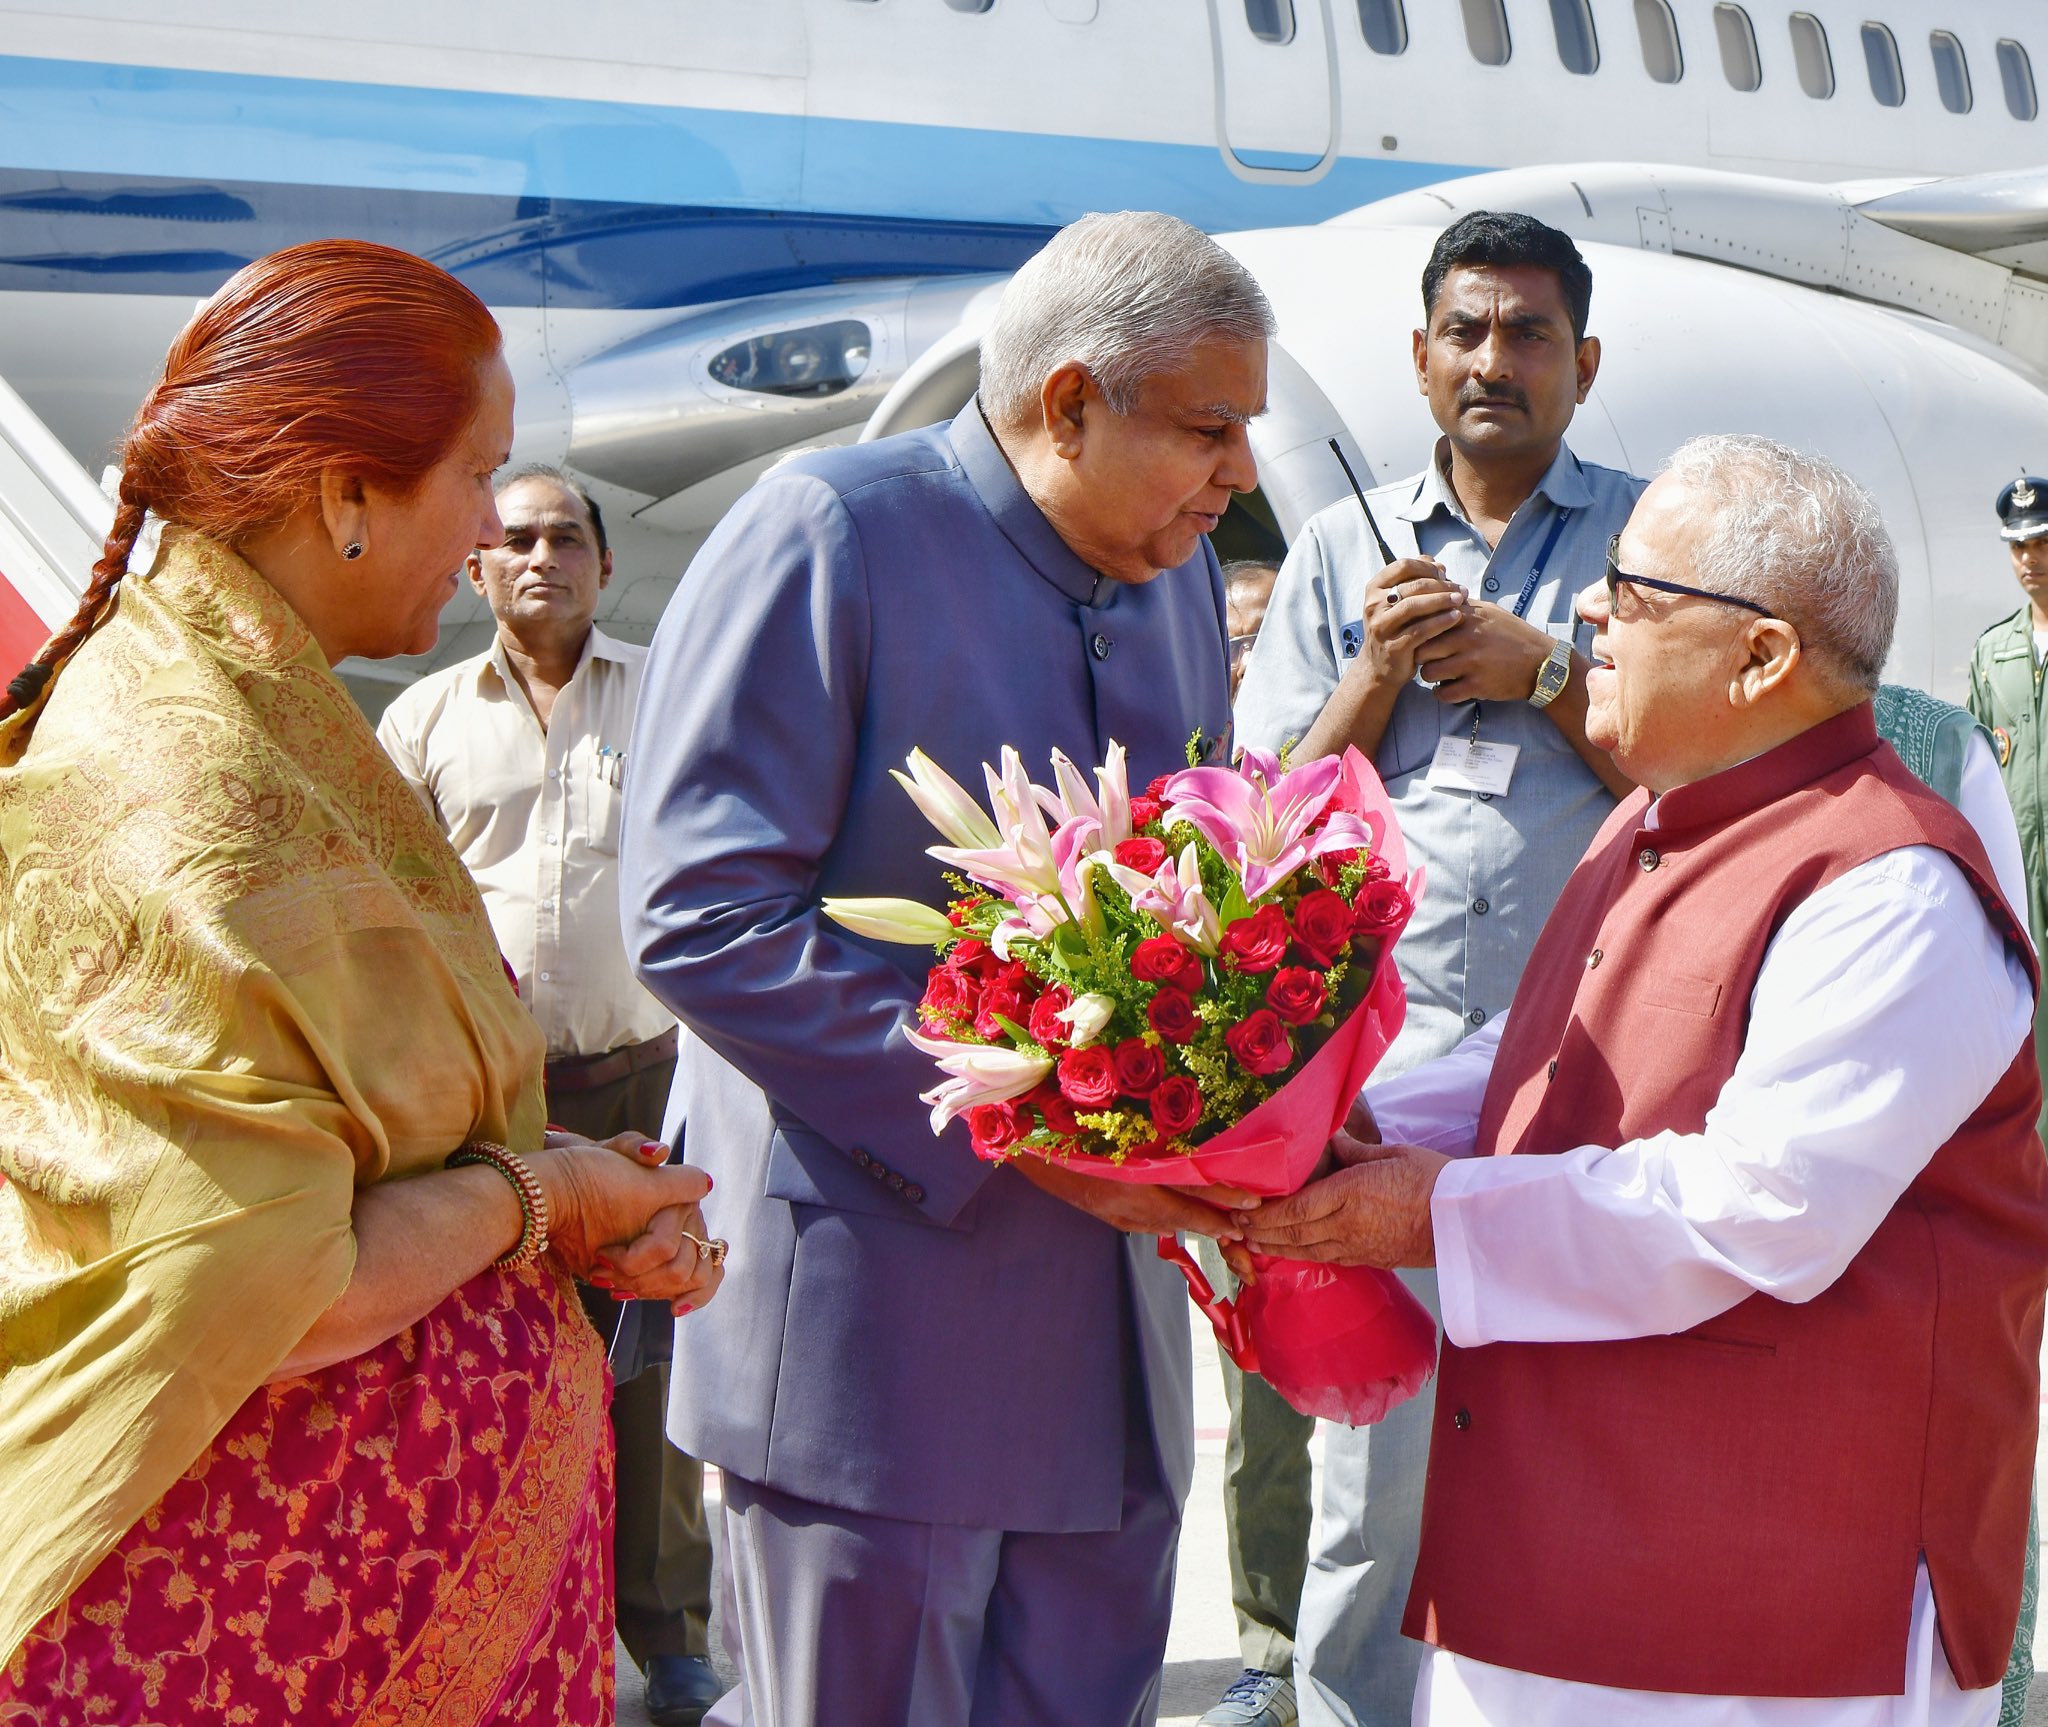  The Vice-President, Shri Jagdeep Dhankhar & Dr. Sudesh Dhankhar being welcomed by Shri Kalraj Mishra, Governor of Rajasthan and other dignitaries on their arrival in Jaipur, Rajasthan on April 30, 2024.